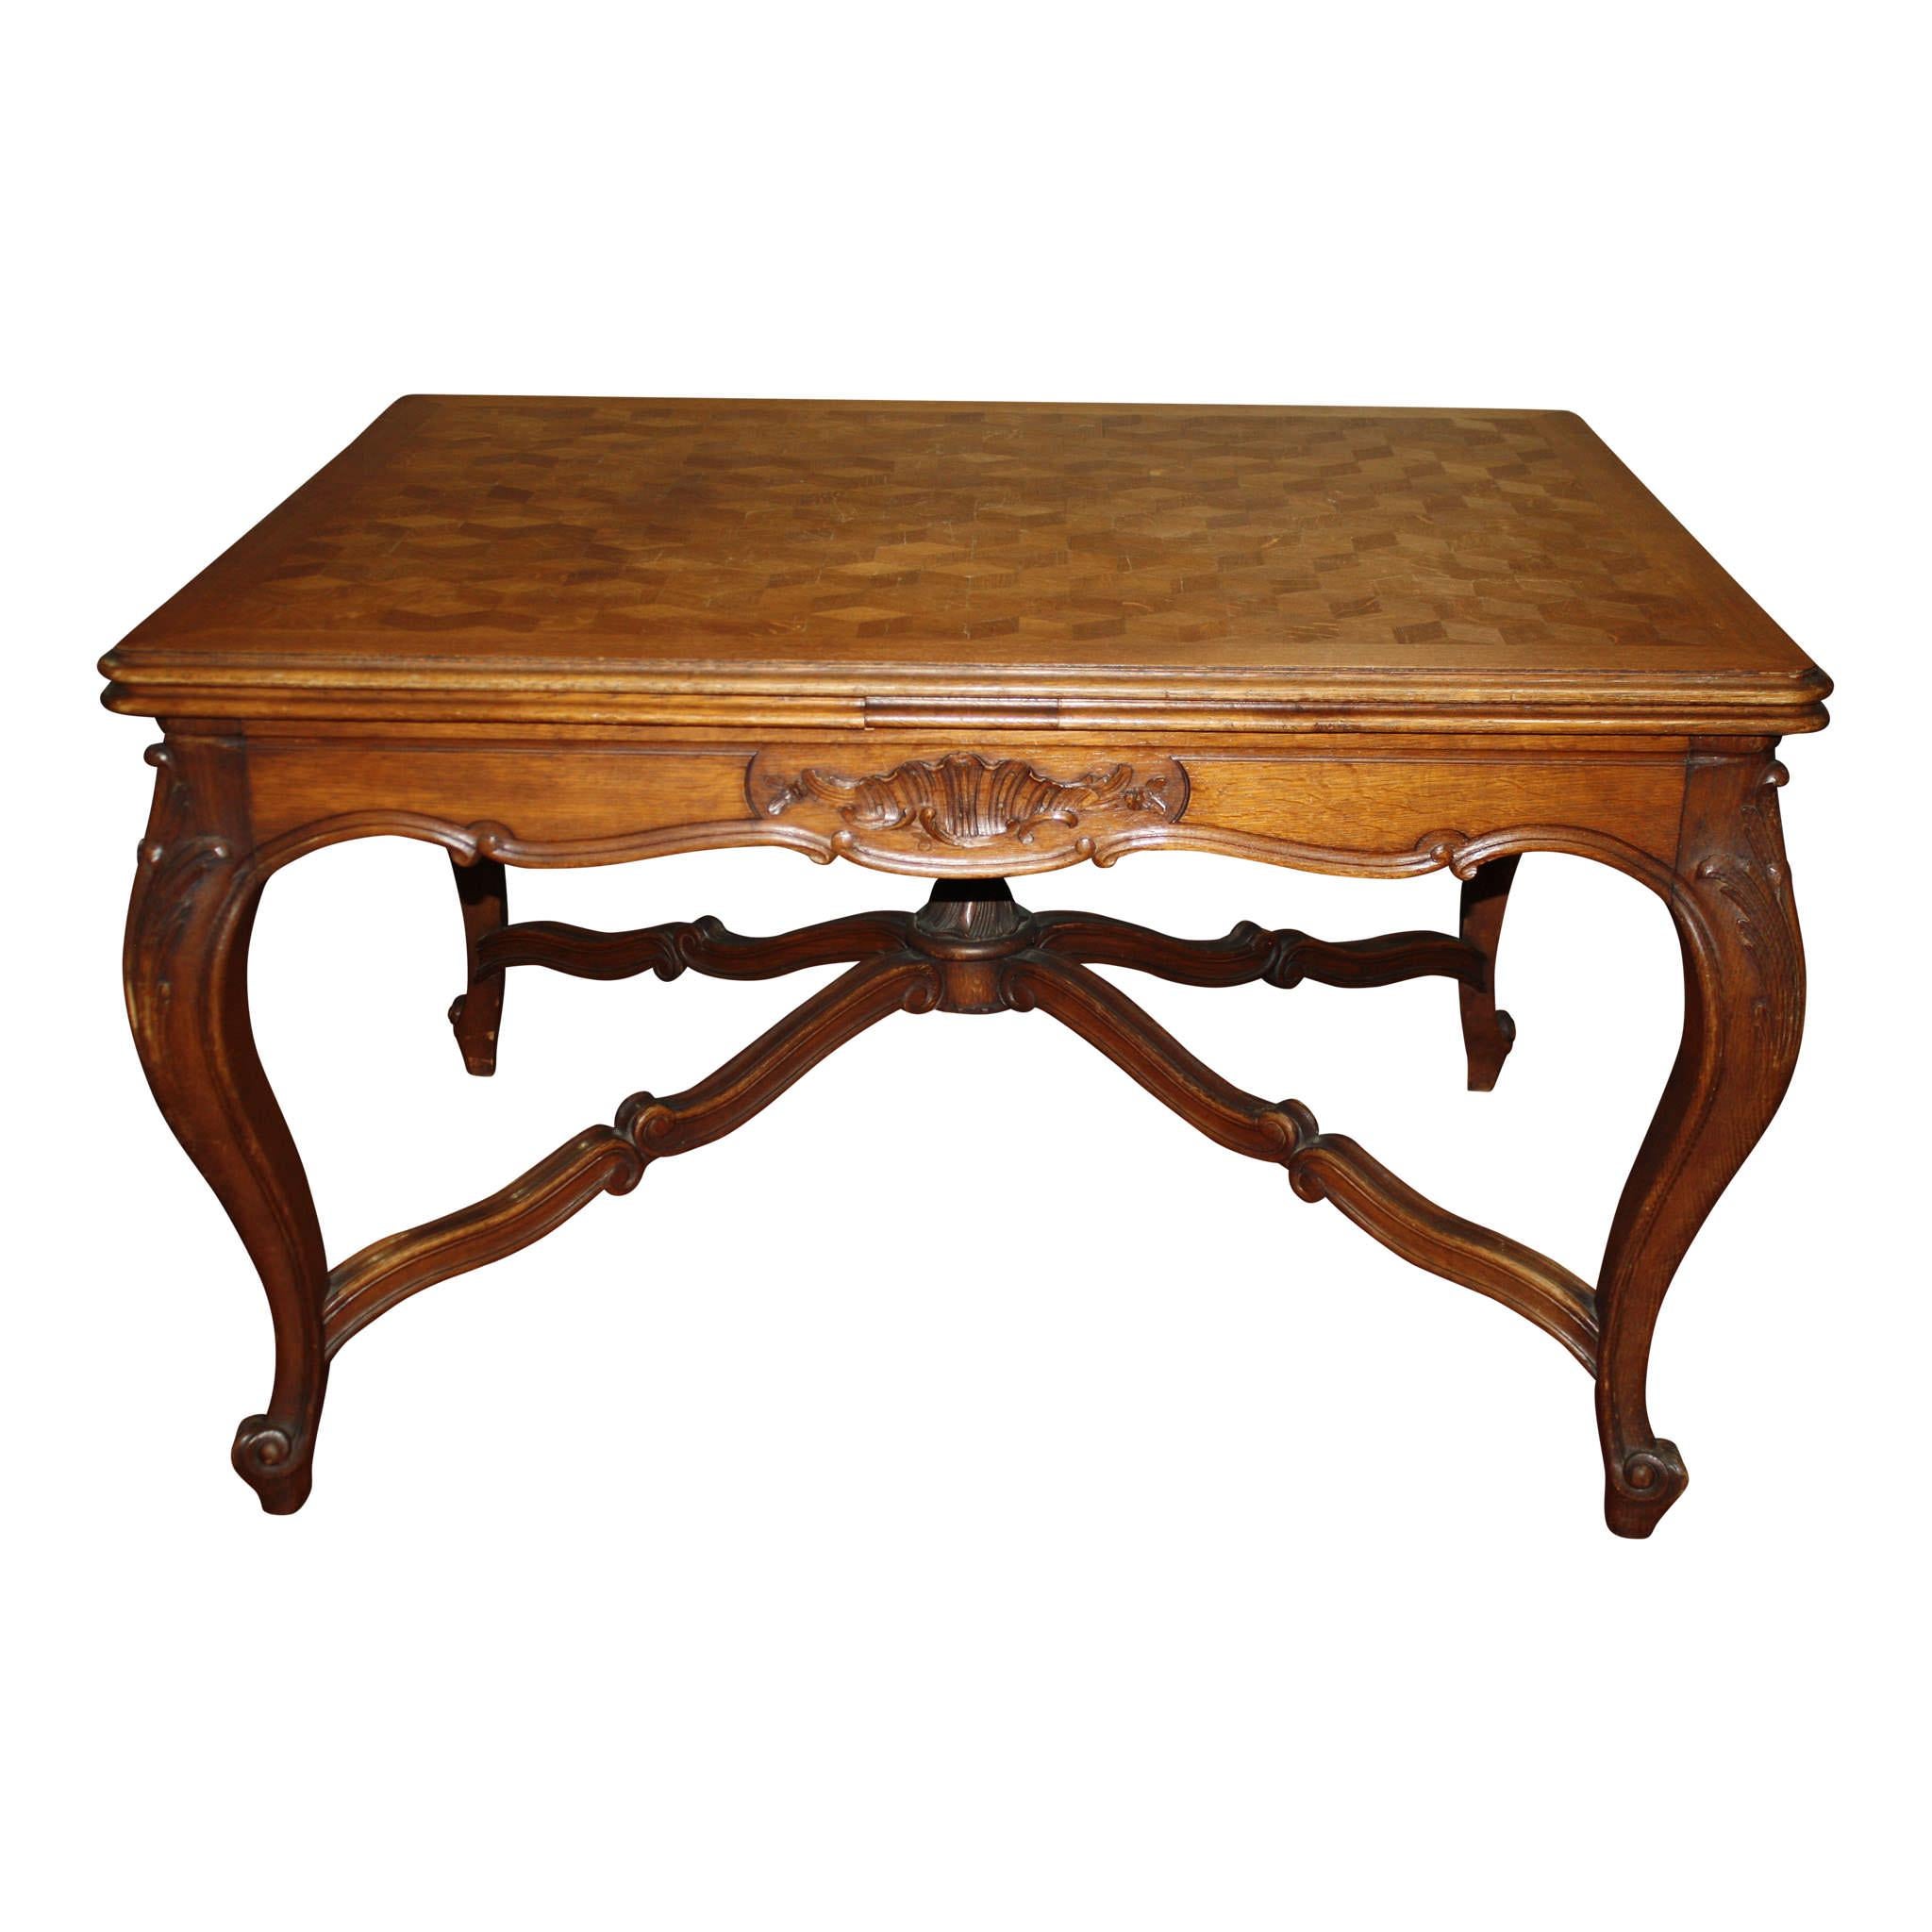 1890 dining room table